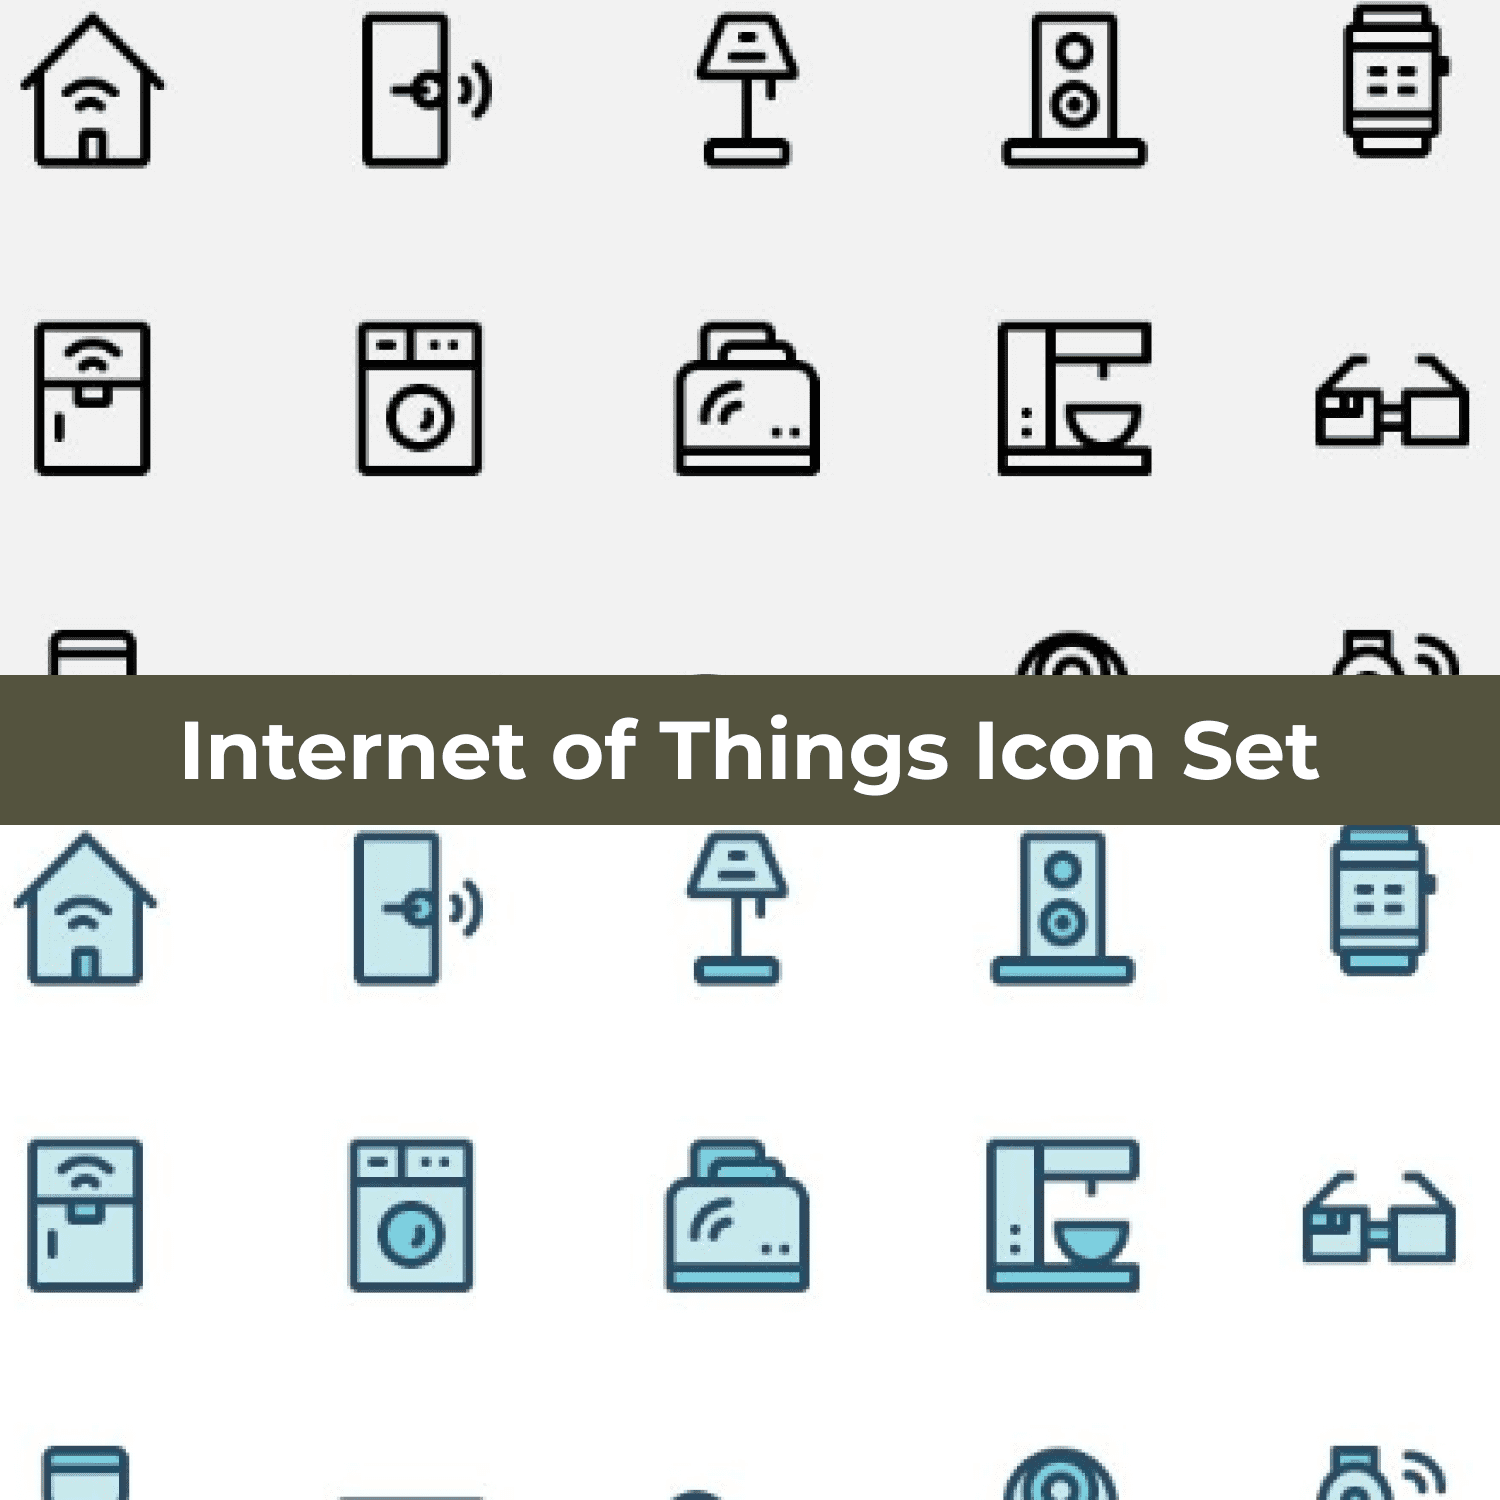 Internet of Things Icon Set cover image.